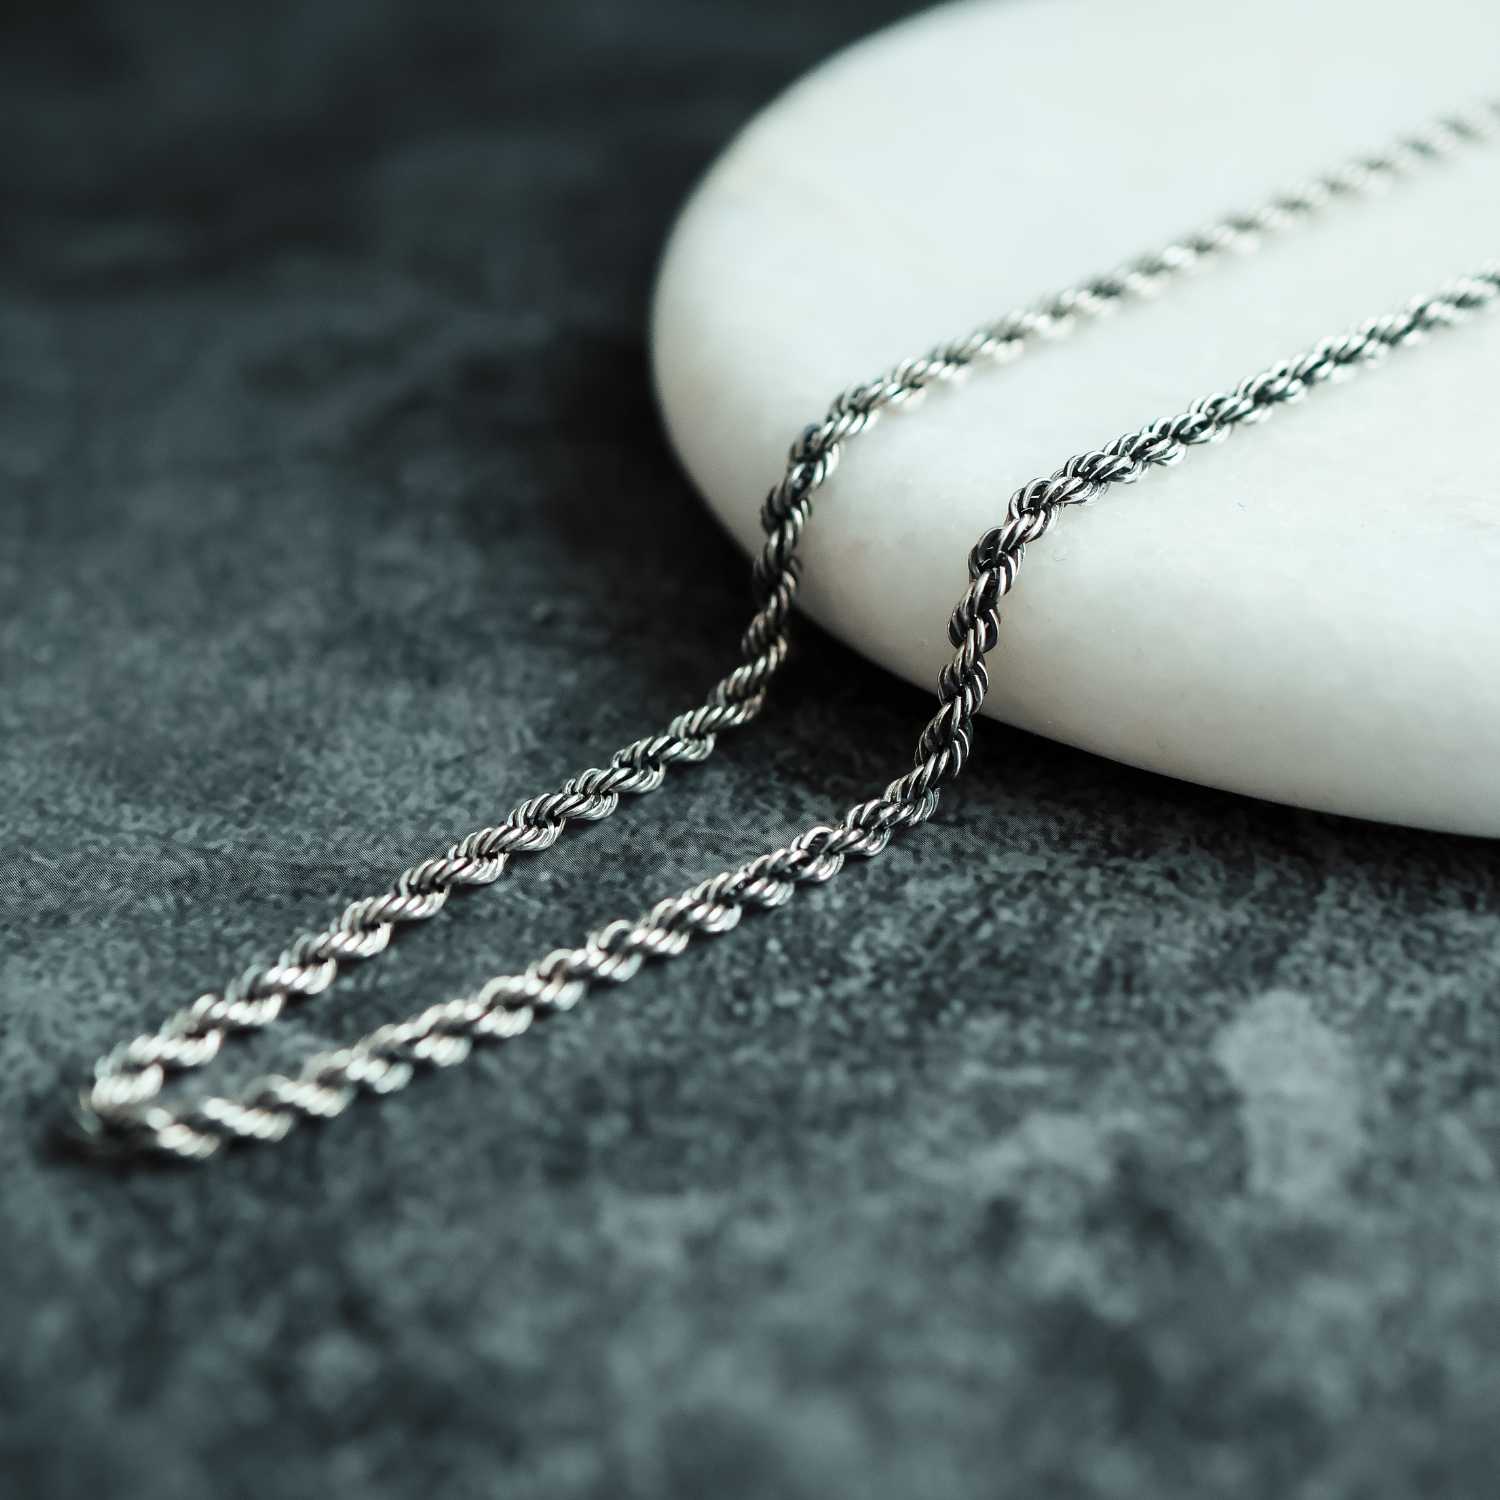 4mm Twist Mens Stainless Steel Rope Chain Necklace – The Steel Shop